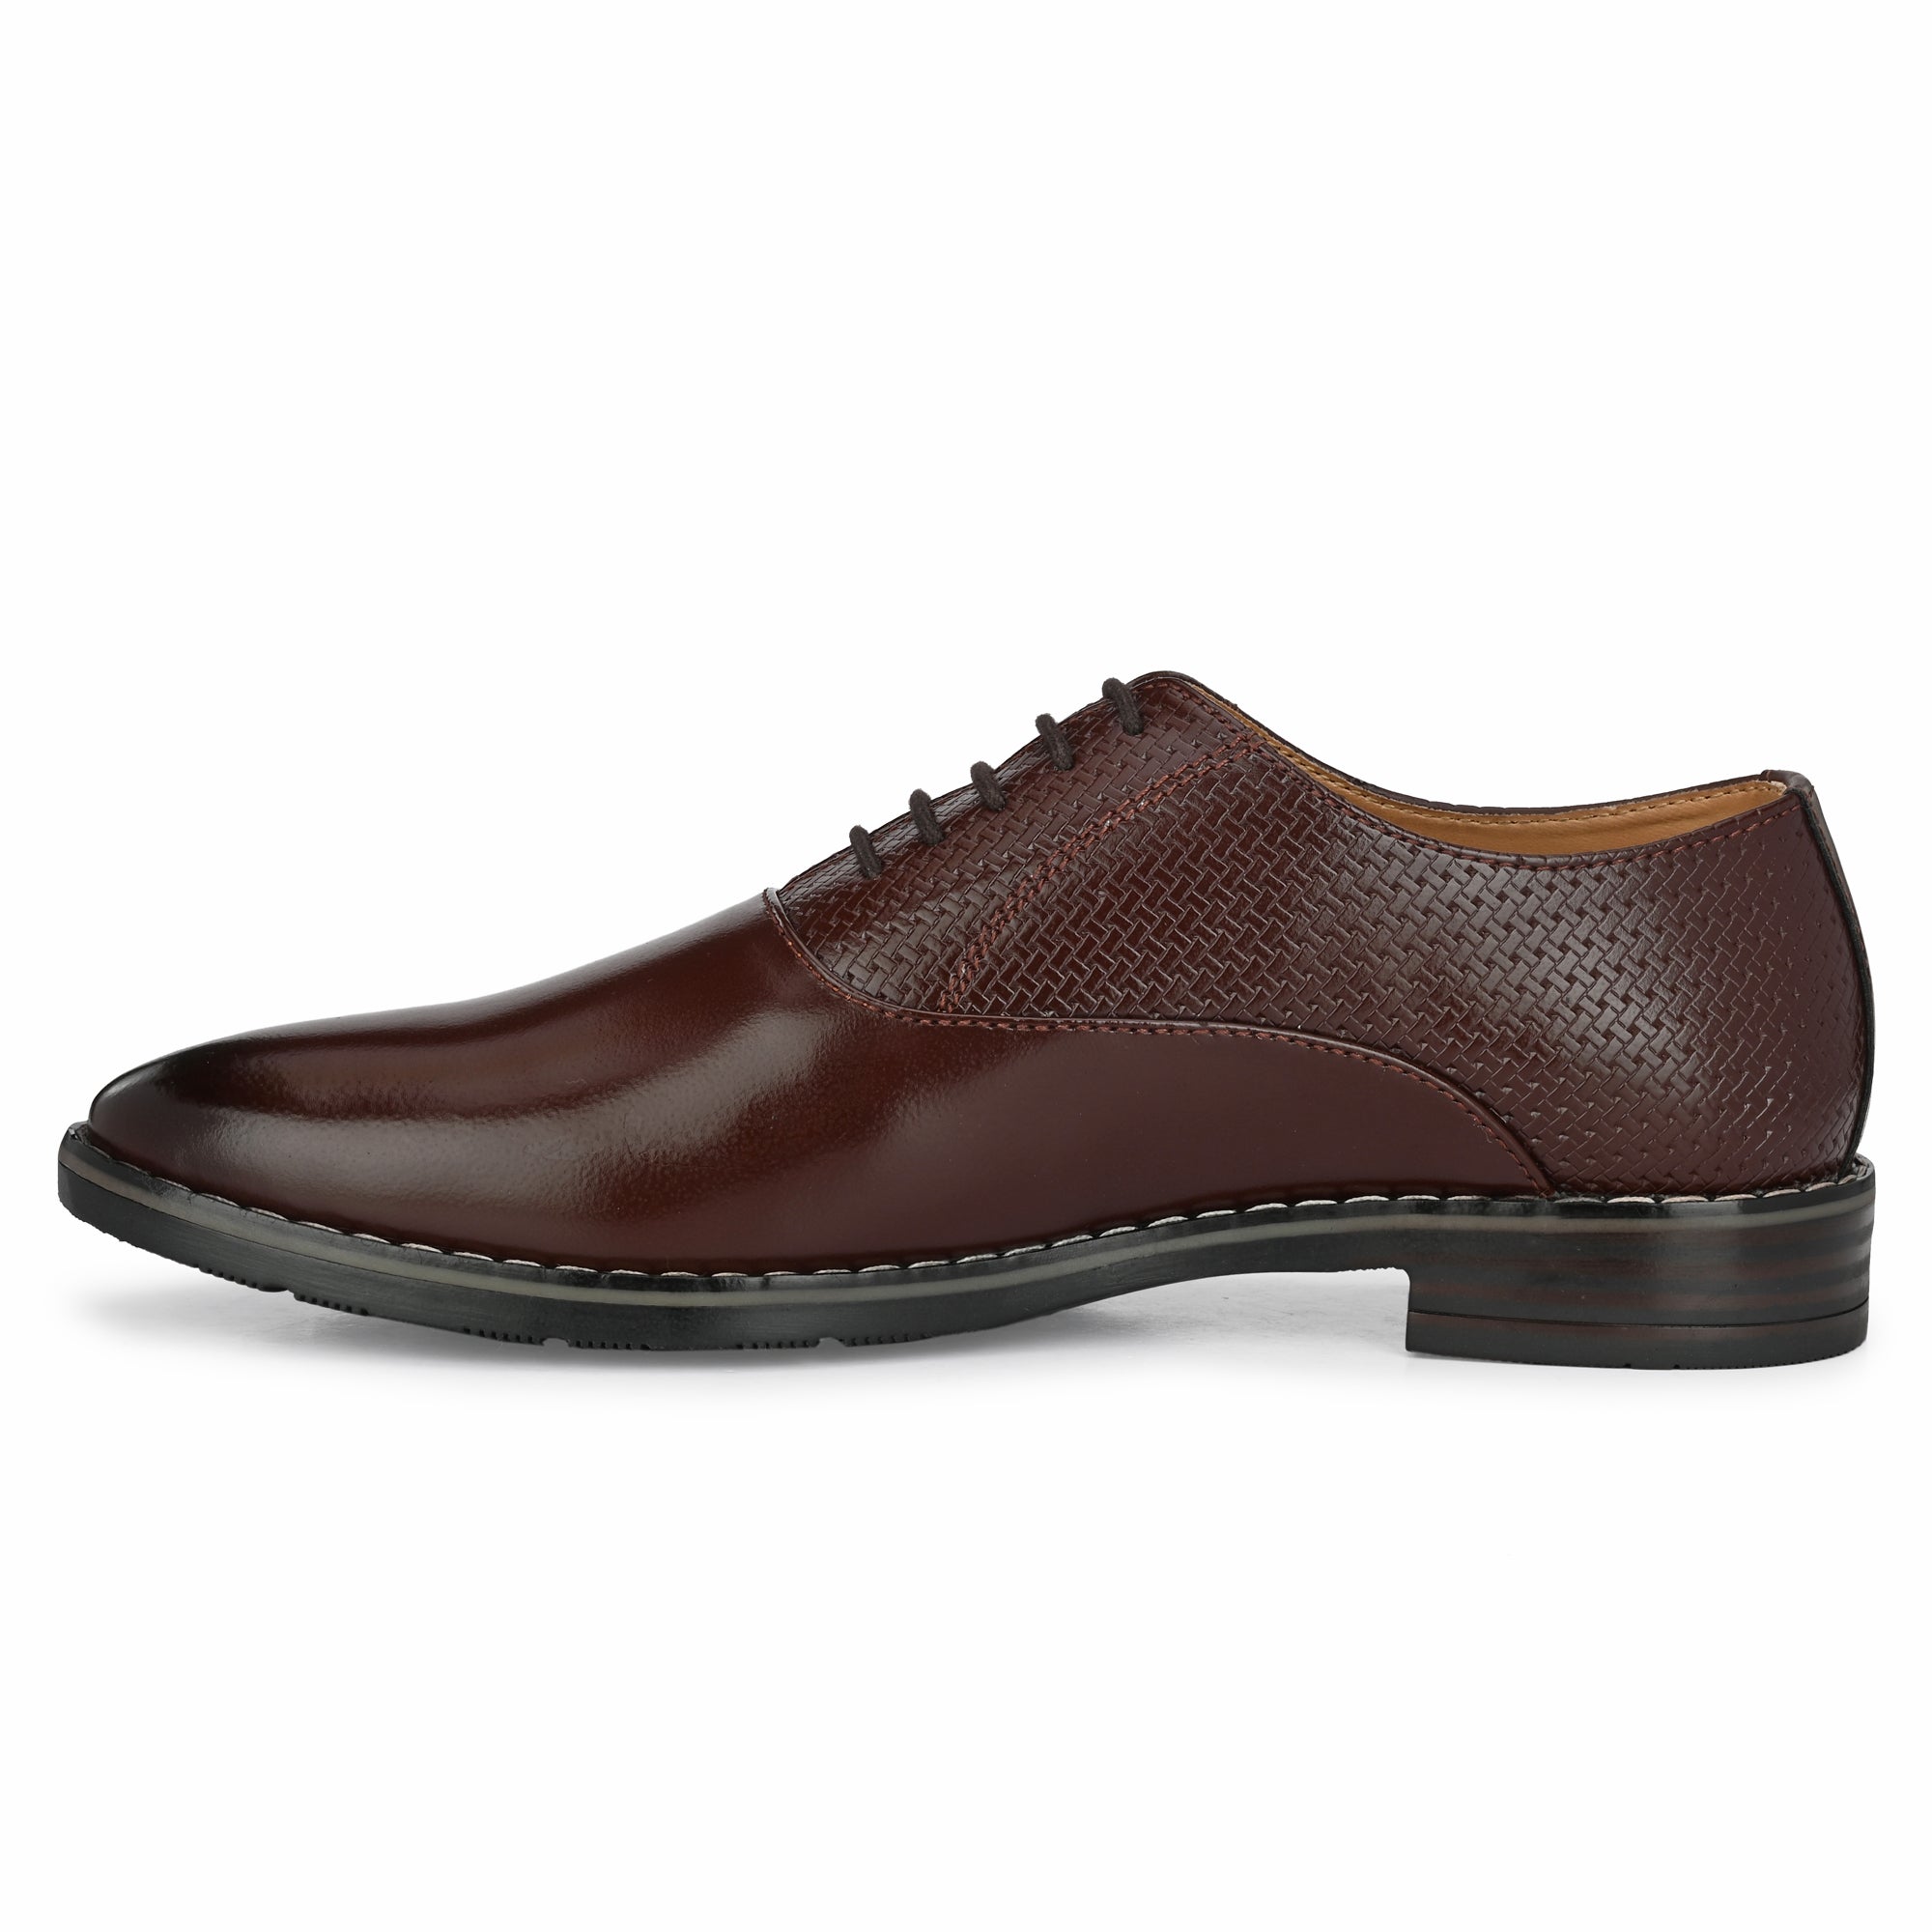 brown-formal-lace-up-attitudist-shoes-for-men-with-semi-chatai-design-sp6b